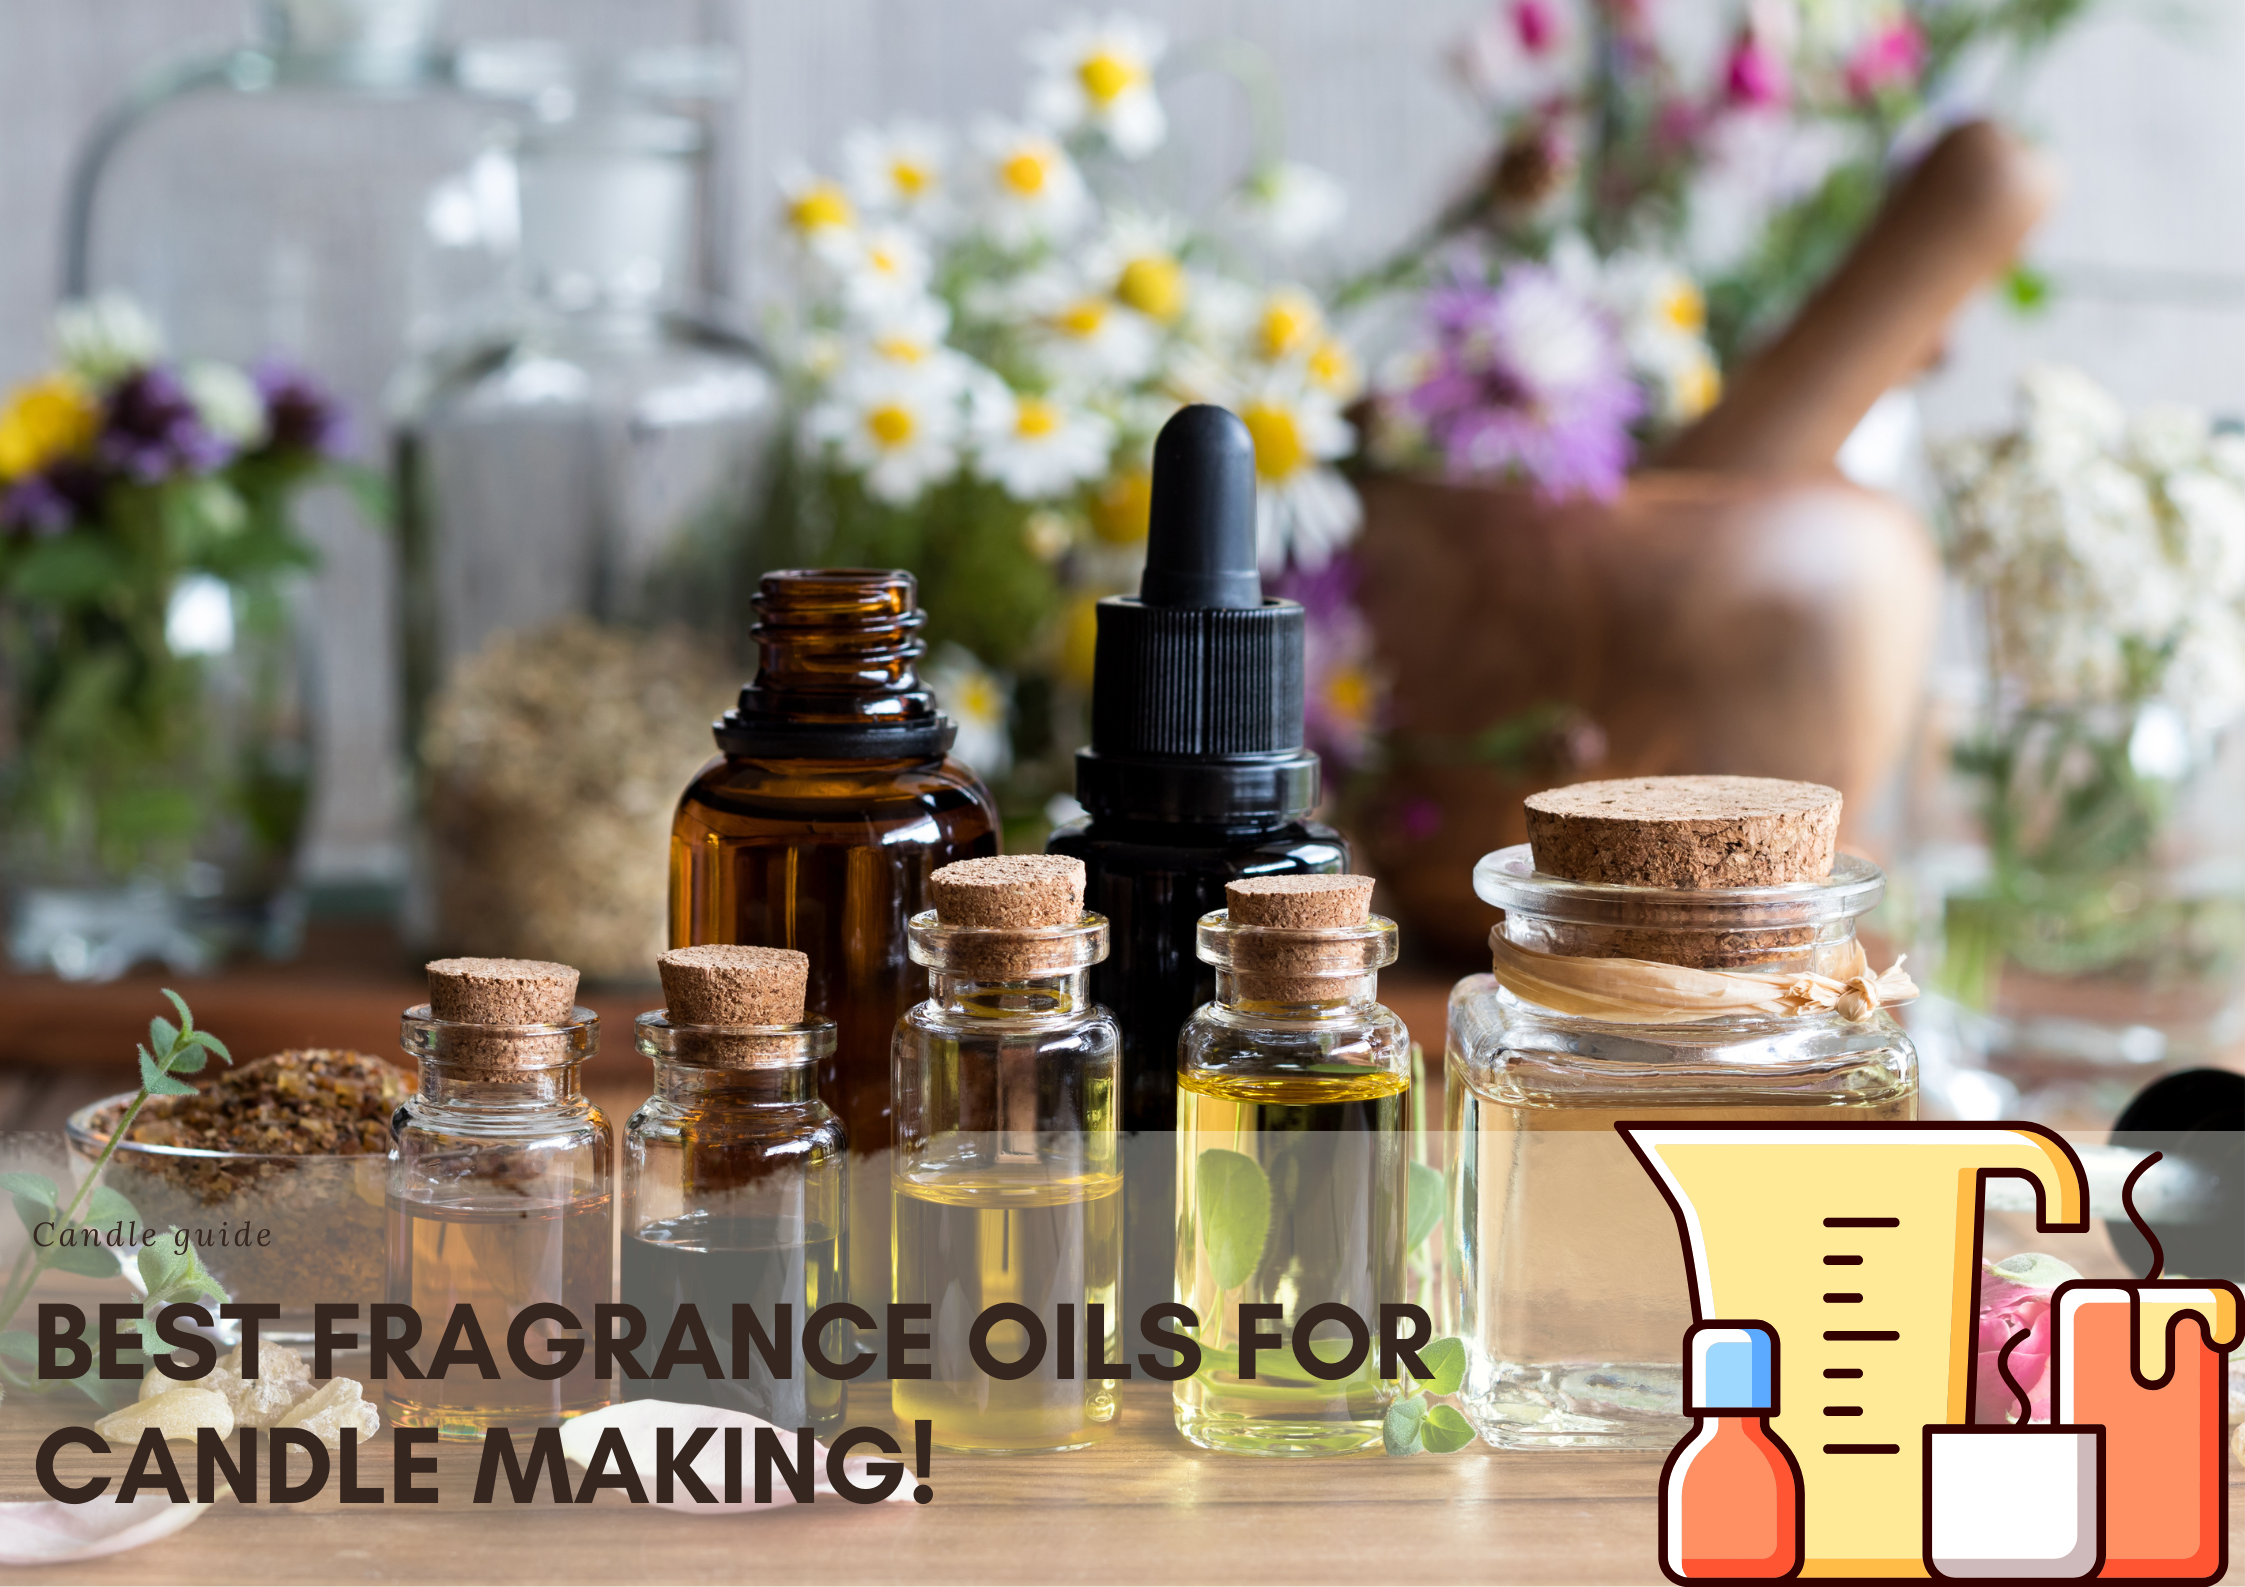 How To Use Fragrance Oil For Candle Making